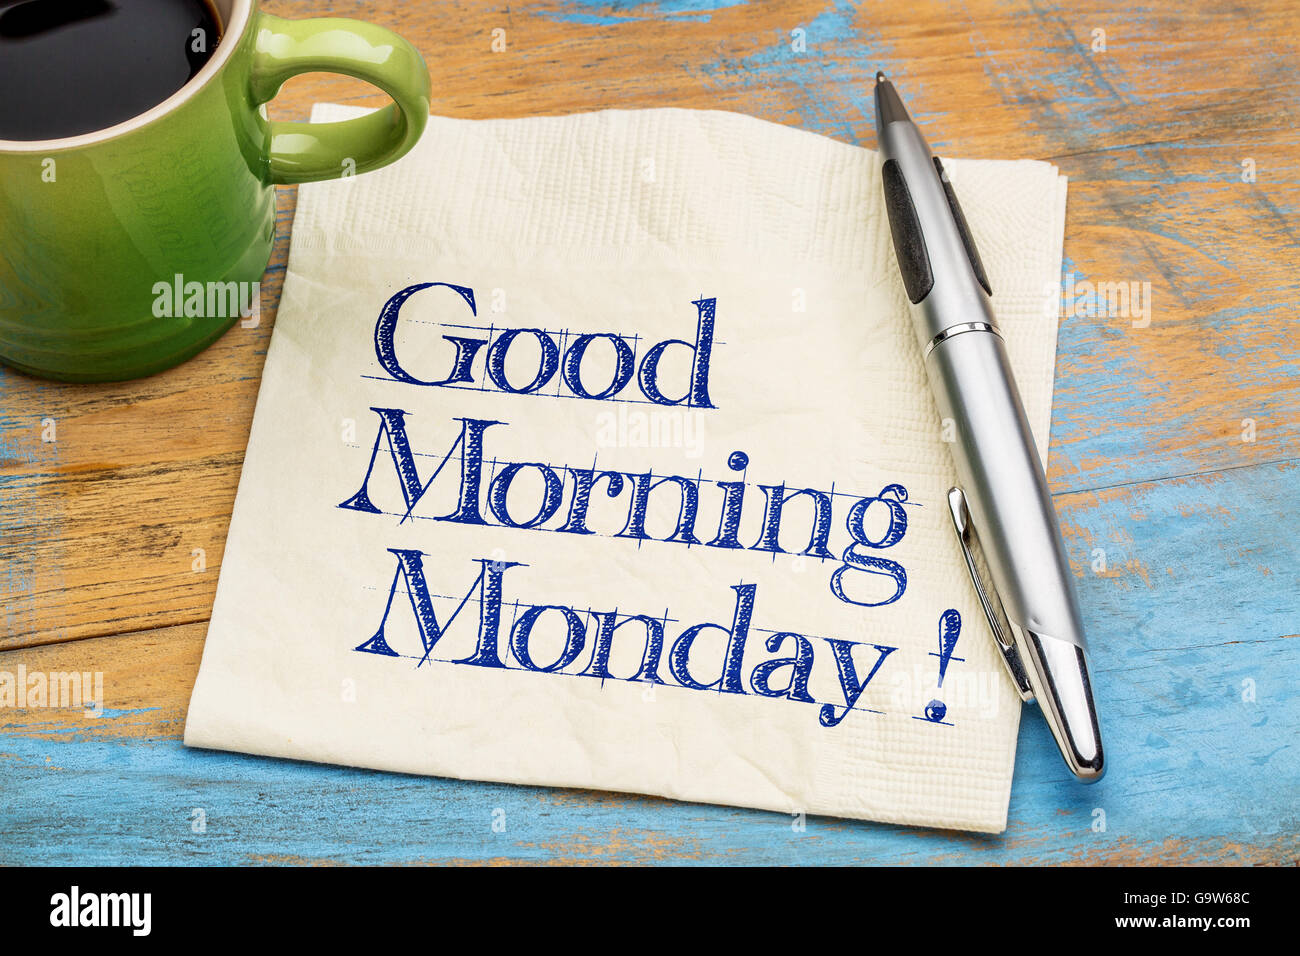 Good Morning Monday - handwriting on a napkin with a cup of coffee and cookie Stock Photo